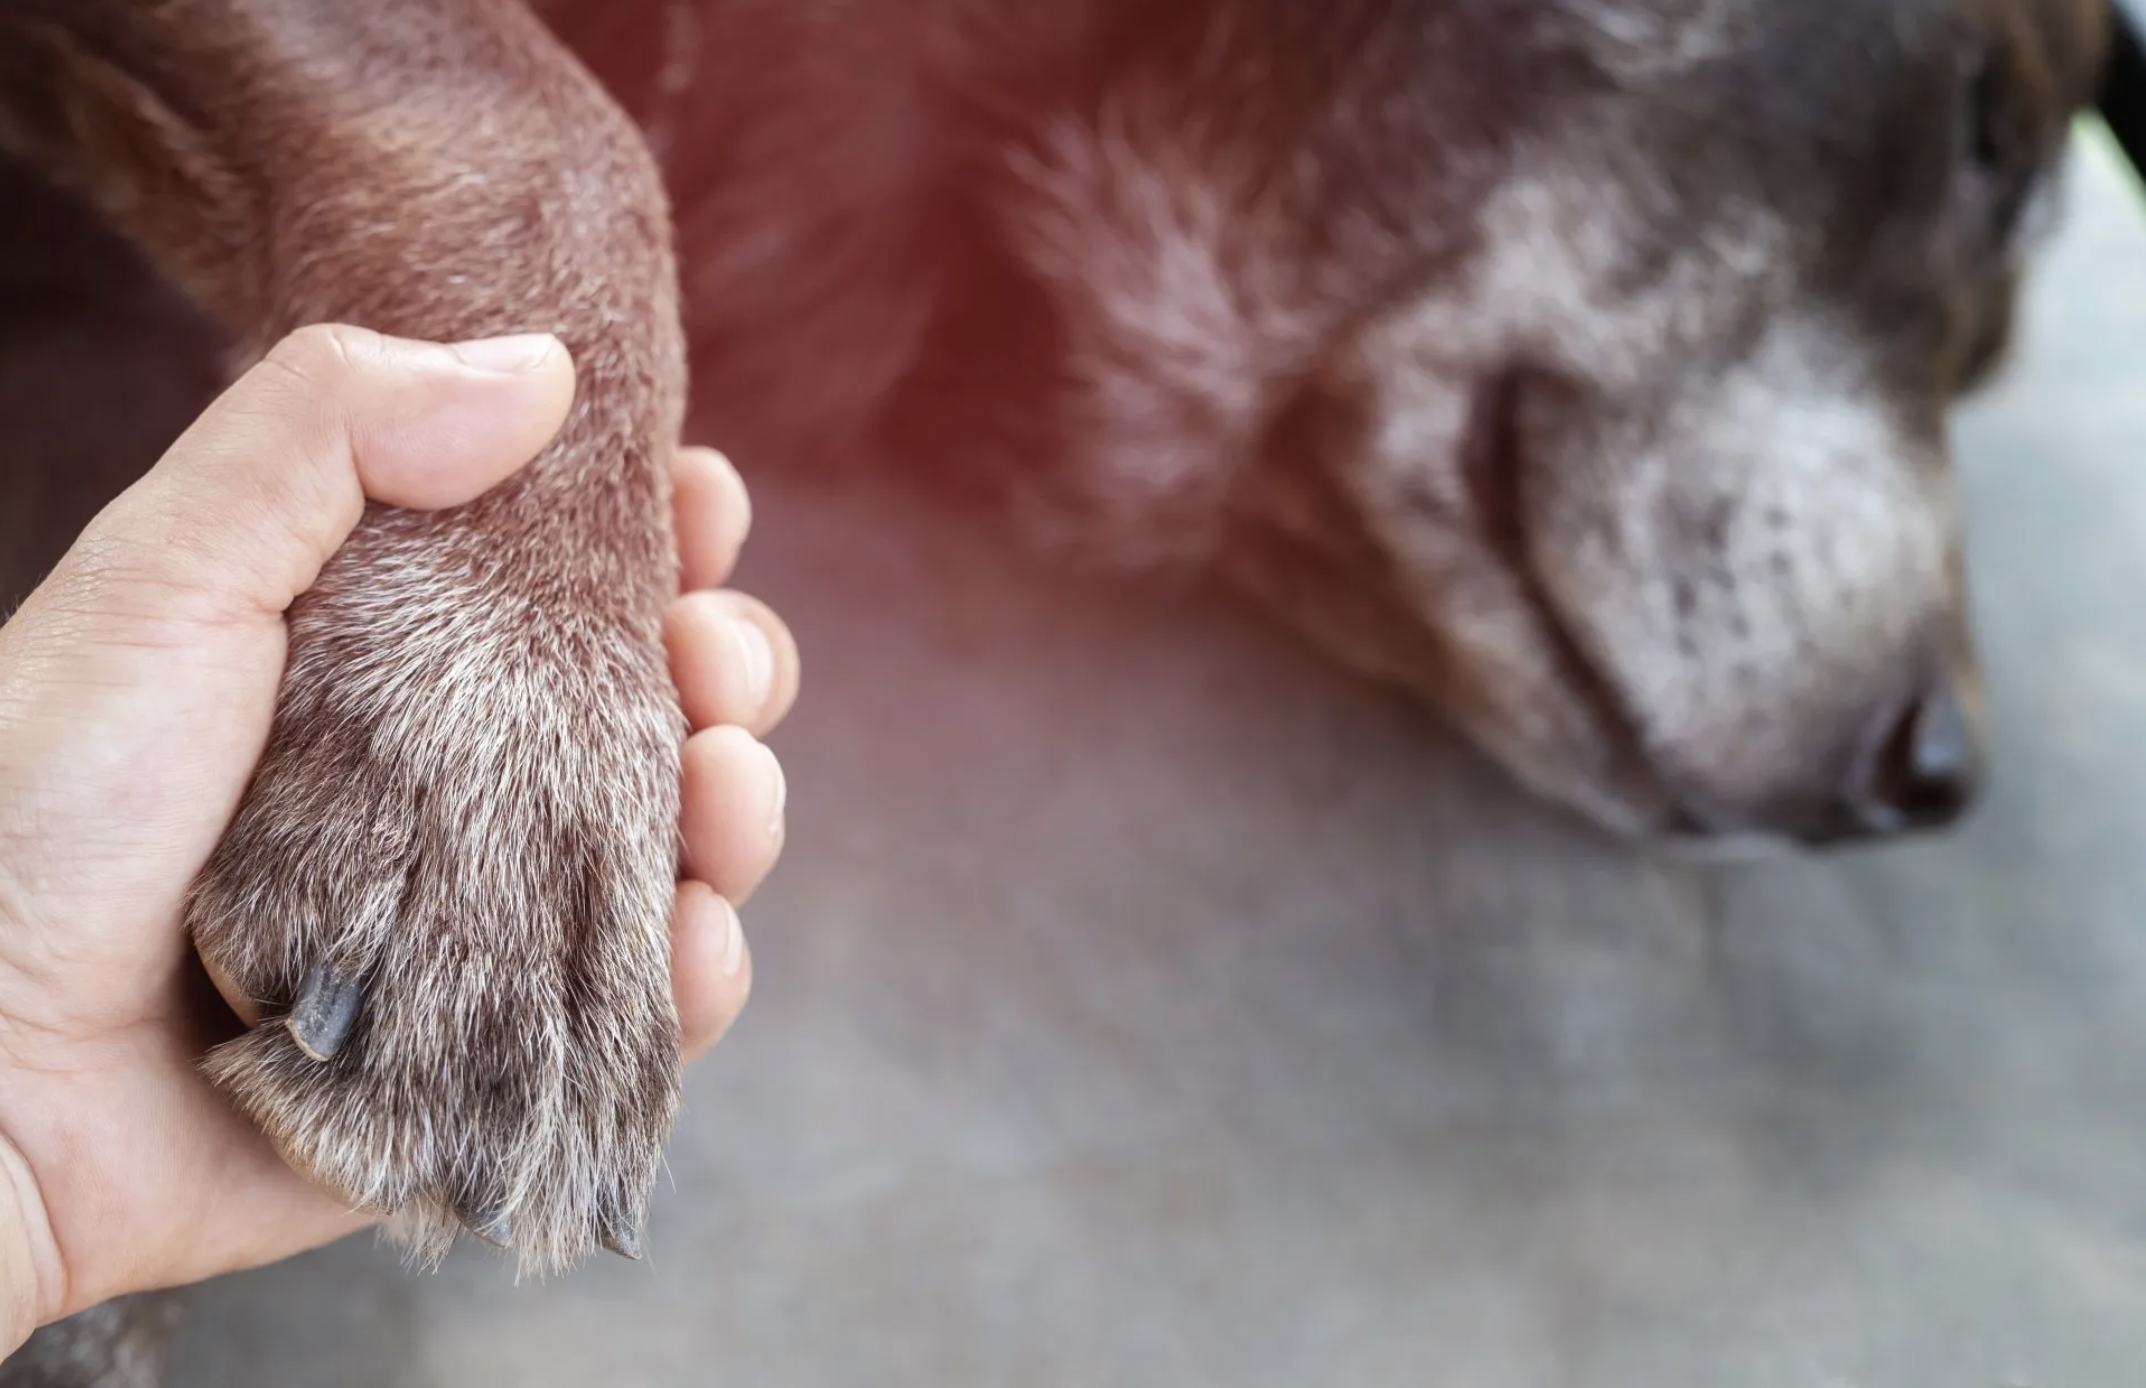 The Death Of A Pet Should Be Taken More Seriously By Therapists